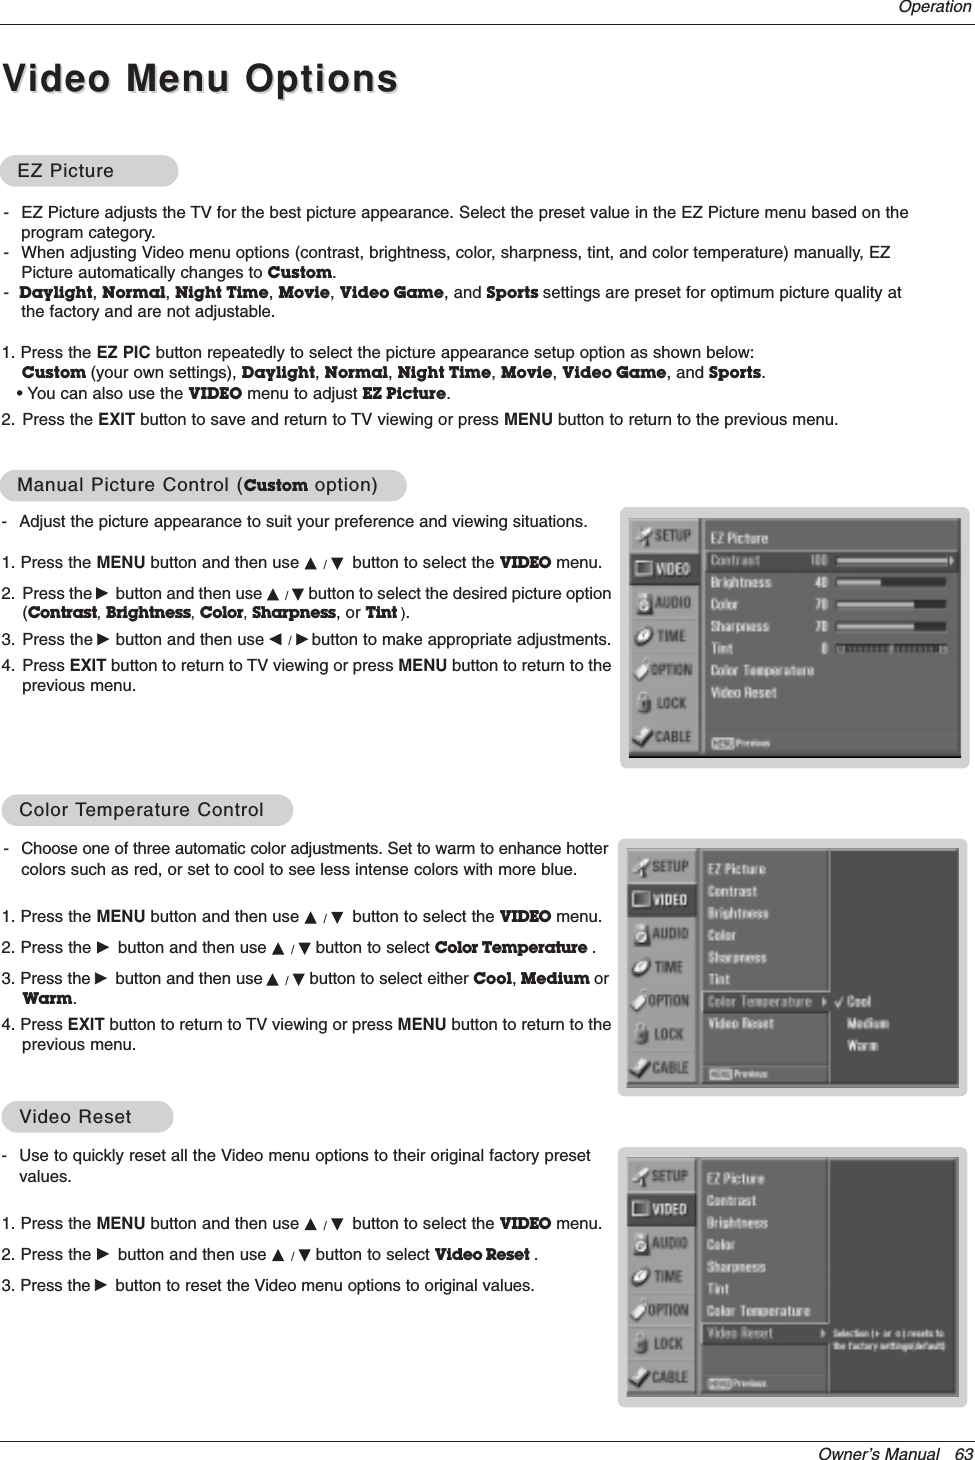 Owner’s Manual   63- Use to quickly reset all the Video menu options to their original factory presetvalues.1. Press the MENU button and then use D / Ebutton to select the VIDEO menu.2. Press the Gbutton and then use D / Ebutton to select Video Reset . 3. Press the Gbutton to reset the Video menu options to original values.VVideo Resetideo ResetOperation- Adjust the picture appearance to suit your preference and viewing situations.1. Press the MENU button and then use D / Ebutton to select the VIDEO menu.2. Press the Gbutton and then use D / Ebutton to select the desired picture option(Contrast,Brightness,Color,Sharpness, or Tint ).3. Press the Gbutton and then use F / Gbutton to make appropriate adjustments.4. Press EXIT button to return to TV viewing or press MENU button to return to theprevious menu.1. Press the EZ PIC button repeatedly to select the picture appearance setup option as shown below:Custom (your own settings), Daylight, Normal, Night Time, Movie, Video Game, and Sports.• You can also use the VIDEO menu to adjust EZ Picture.2. Press the EXIT button to save and return to TV viewing or press MENU button to return to the previous menu. EZ PictureEZ PictureManual Picture Control (Manual Picture Control (Custom option)option)- Choose one of three automatic color adjustments. Set to warm to enhance hottercolors such as red, or set to cool to see less intense colors with more blue.1. Press the MENU button and then use D / Ebutton to select the VIDEO menu.2. Press the Gbutton and then use D / Ebutton to select Color Temperature . 3. Press the Gbutton and then use D / Ebutton to select either Cool,Medium orWarm.4. Press EXIT button to return to TV viewing or press MENU button to return to theprevious menu.Color Color TTemperature Controlemperature Control- EZ Picture adjusts the TV for the best picture appearance. Select the preset value in the EZ Picture menu based on theprogram category.- When adjusting Video menu options (contrast, brightness, color, sharpness, tint, and color temperature) manually, EZPicture automatically changes to Custom.-Daylight, Normal, Night Time, Movie, Video Game, and Sports settings are preset for optimum picture quality atthe factory and are not adjustable.VVideo Menu Optionsideo Menu Options